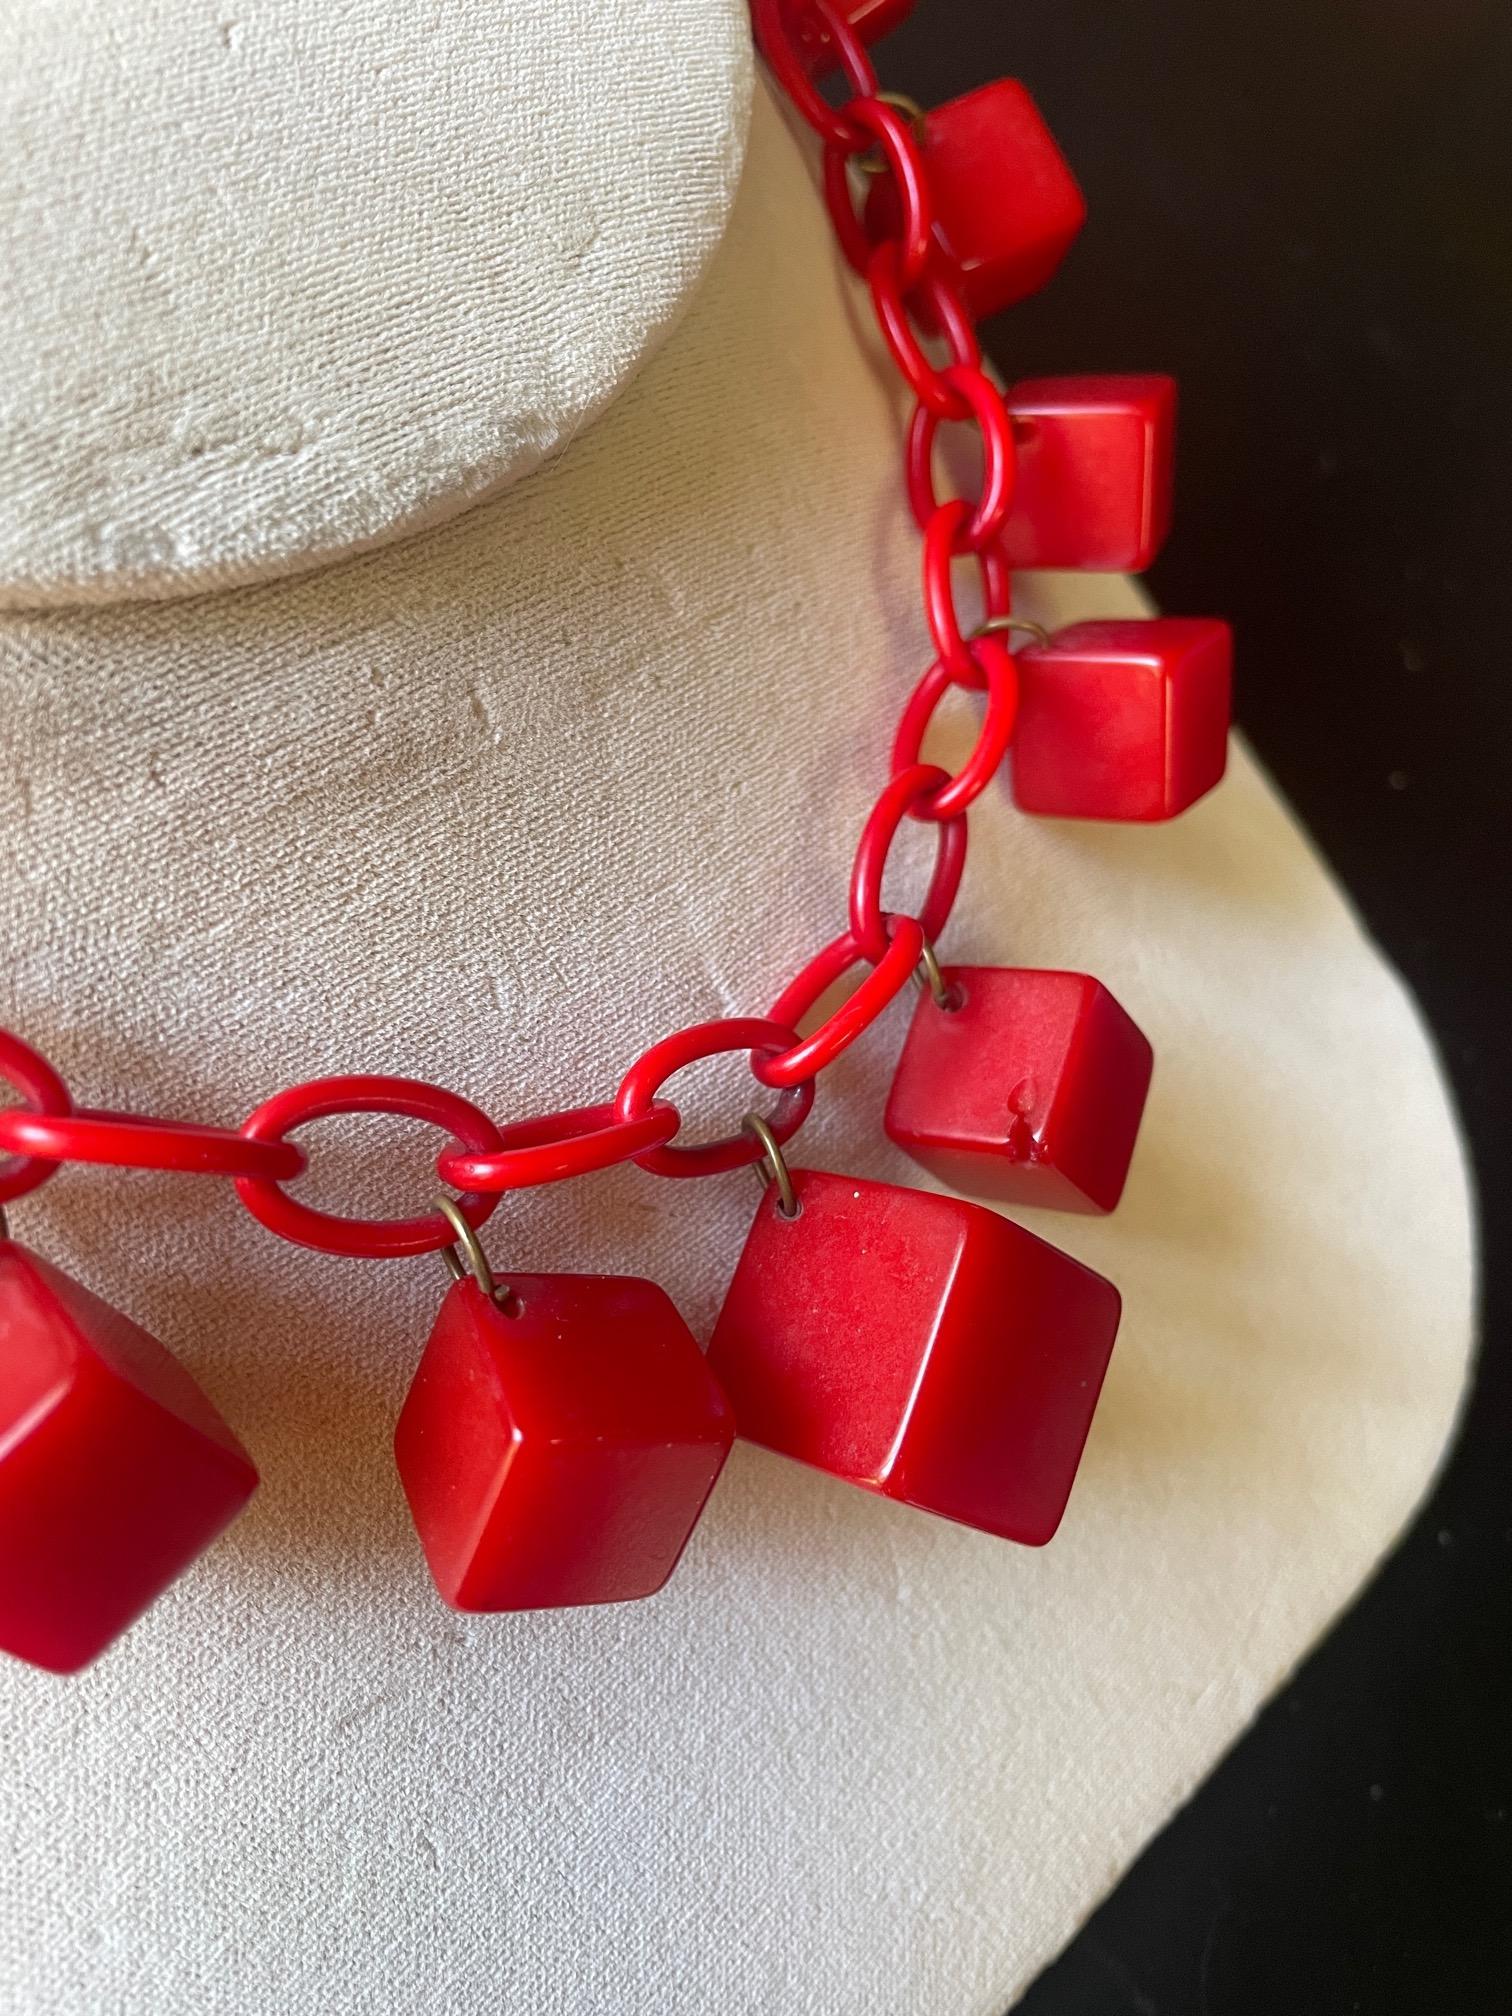 Mid-20th Century Antique Bakelite Nº11 Cubist NYC Art Deco Cherry Red Charm Necklace  For Sale